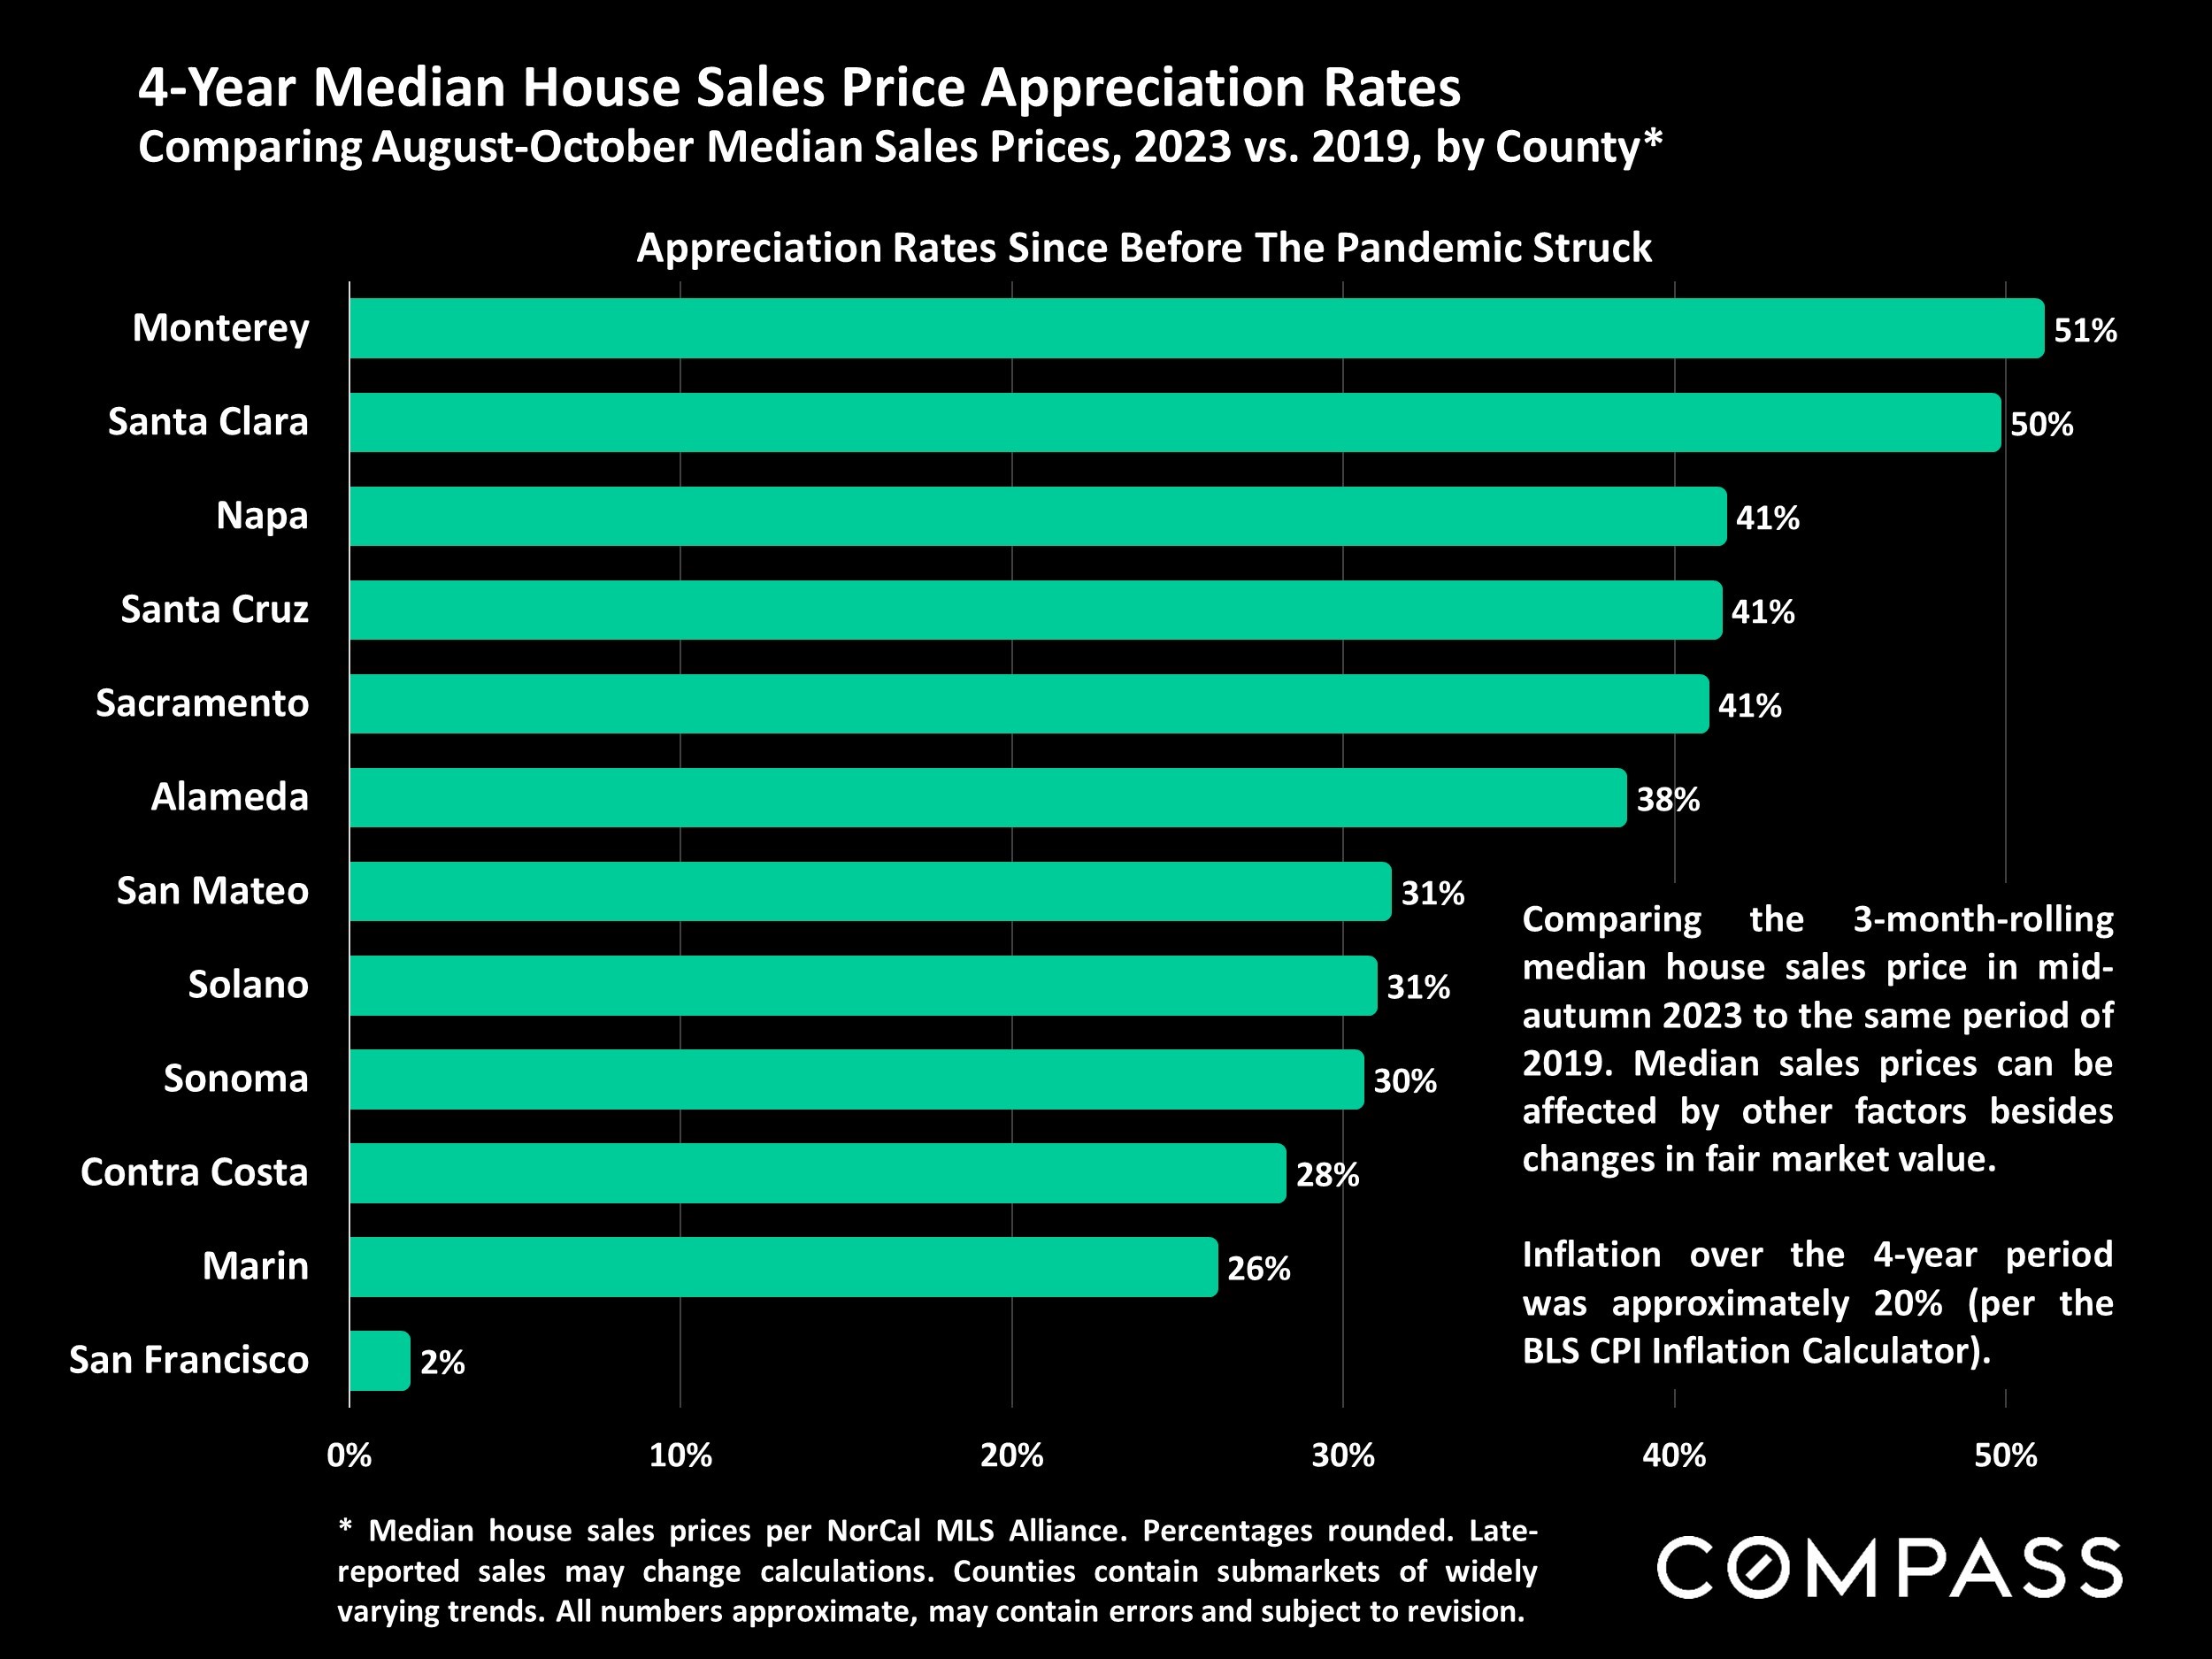 4-Year M e d i a n H o u s e S a l e s Price Appreciation R a t e s Comparing August-October Median Sales Prices, 2023 vs. 2019, by County*